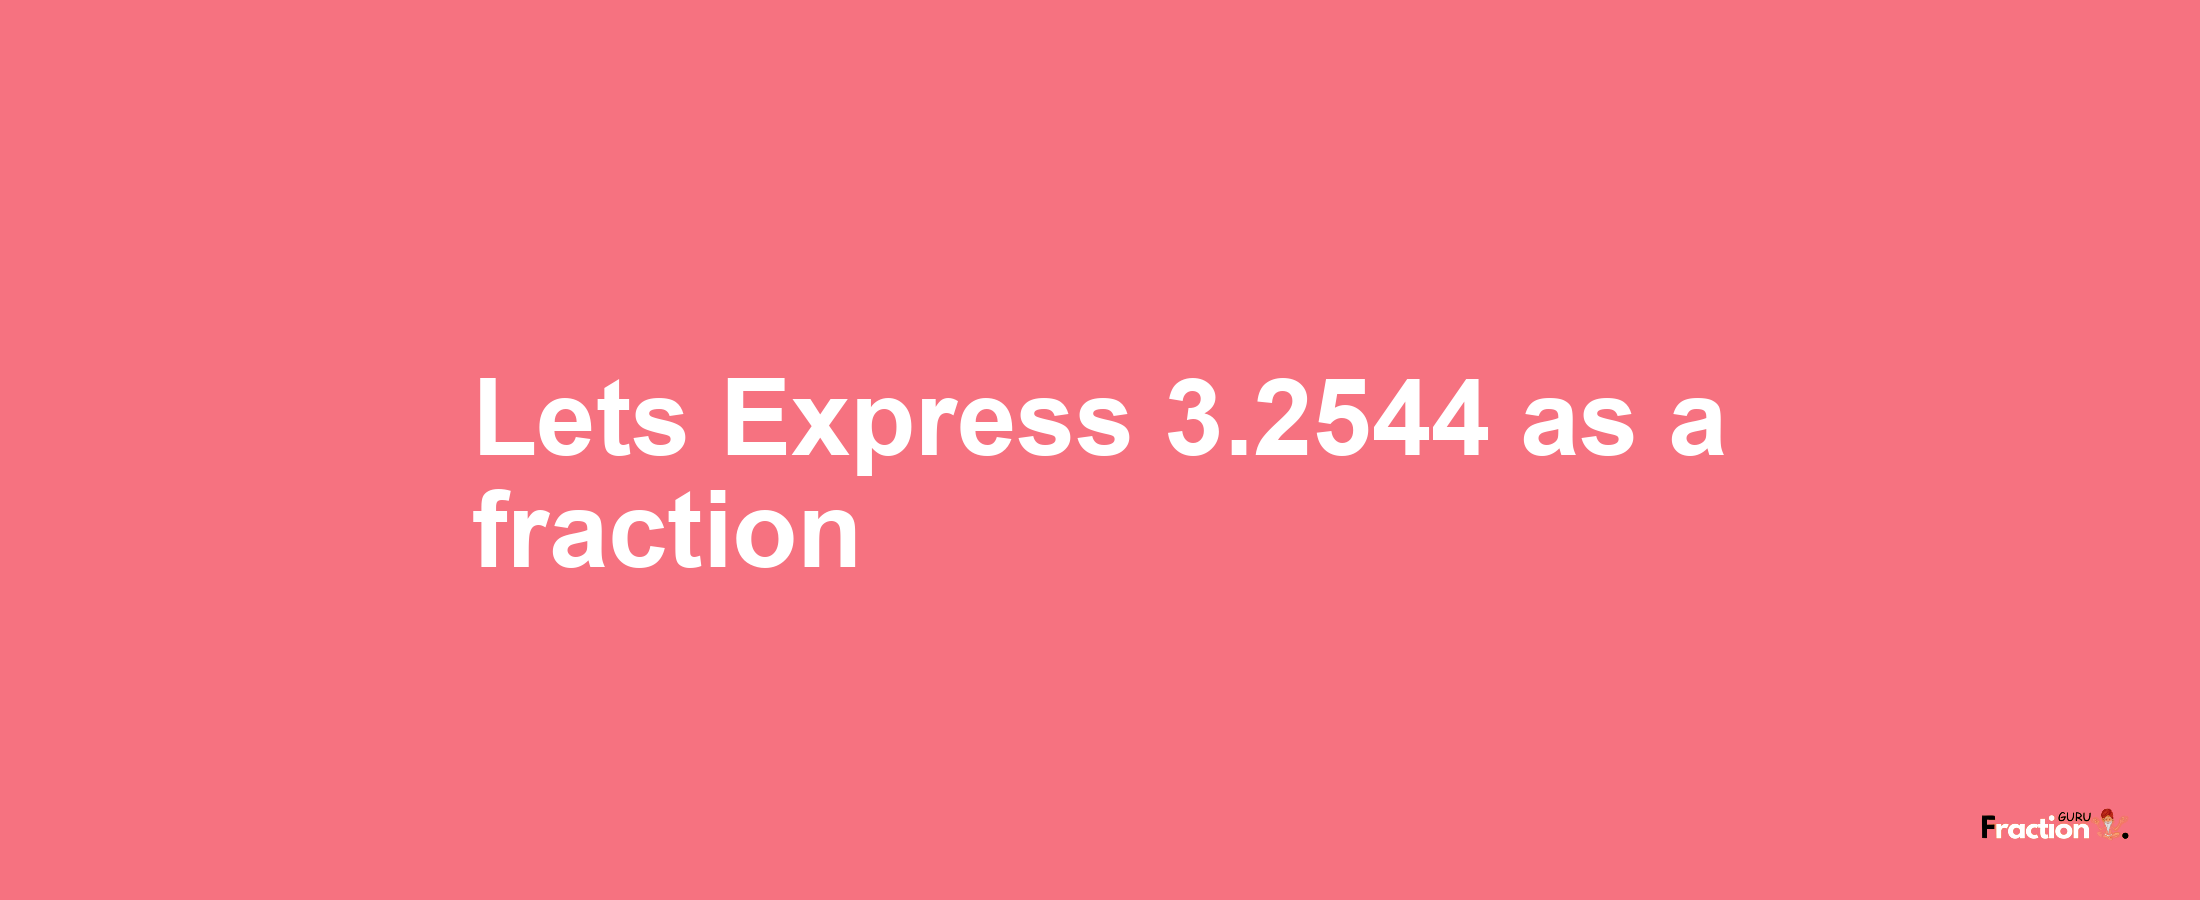 Lets Express 3.2544 as afraction